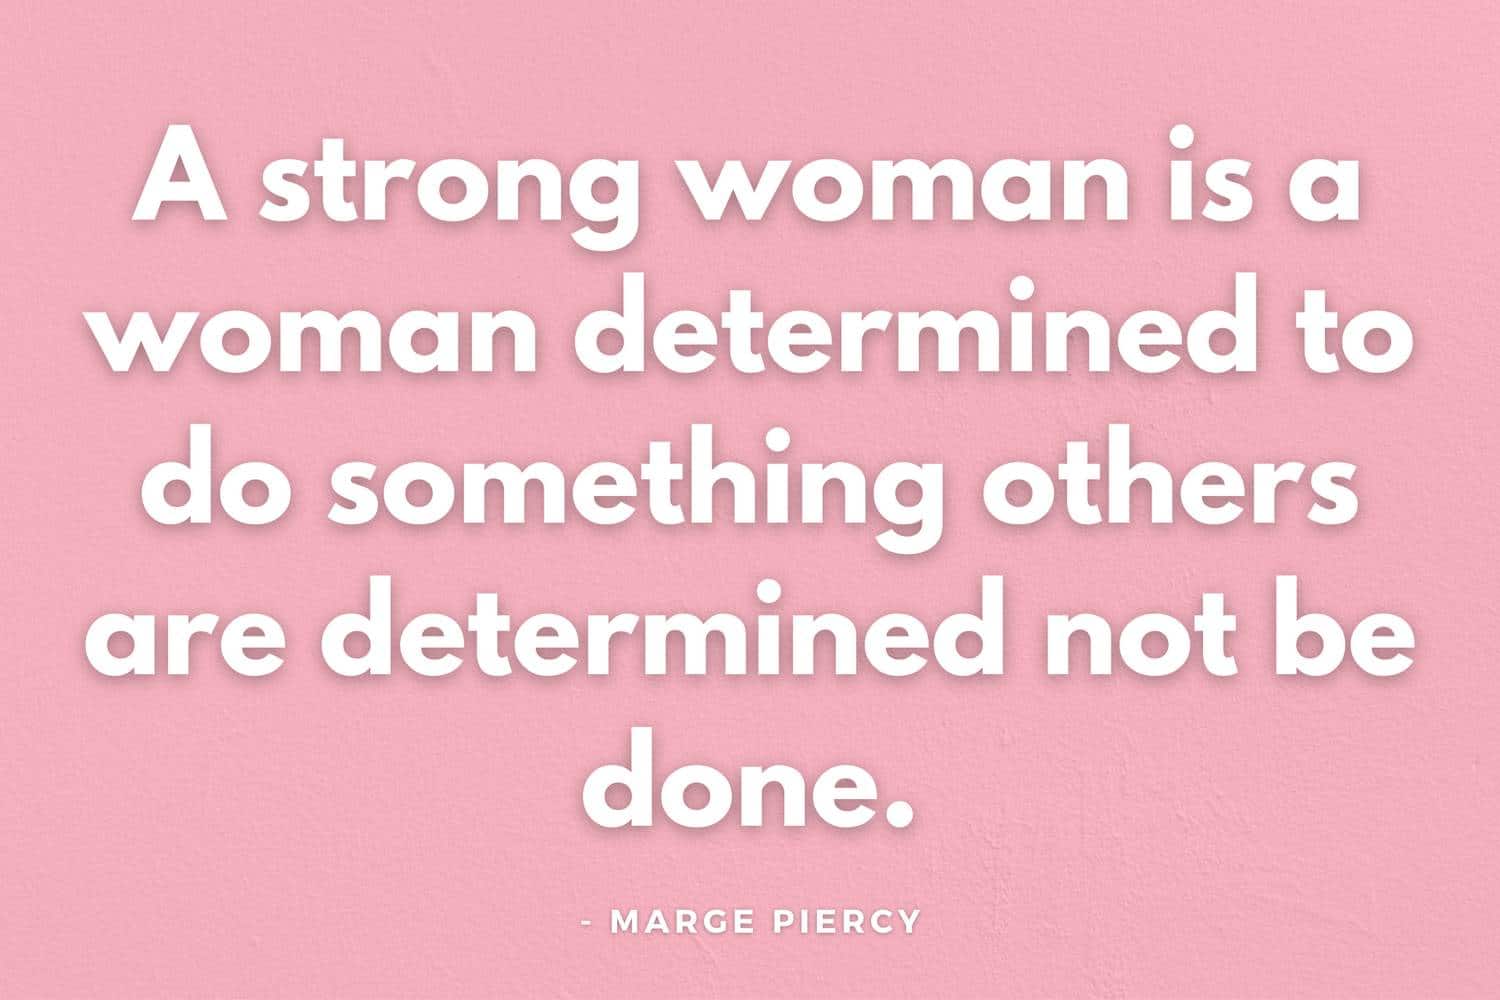 A strong woman is a woman determined to do something others are determined not be done